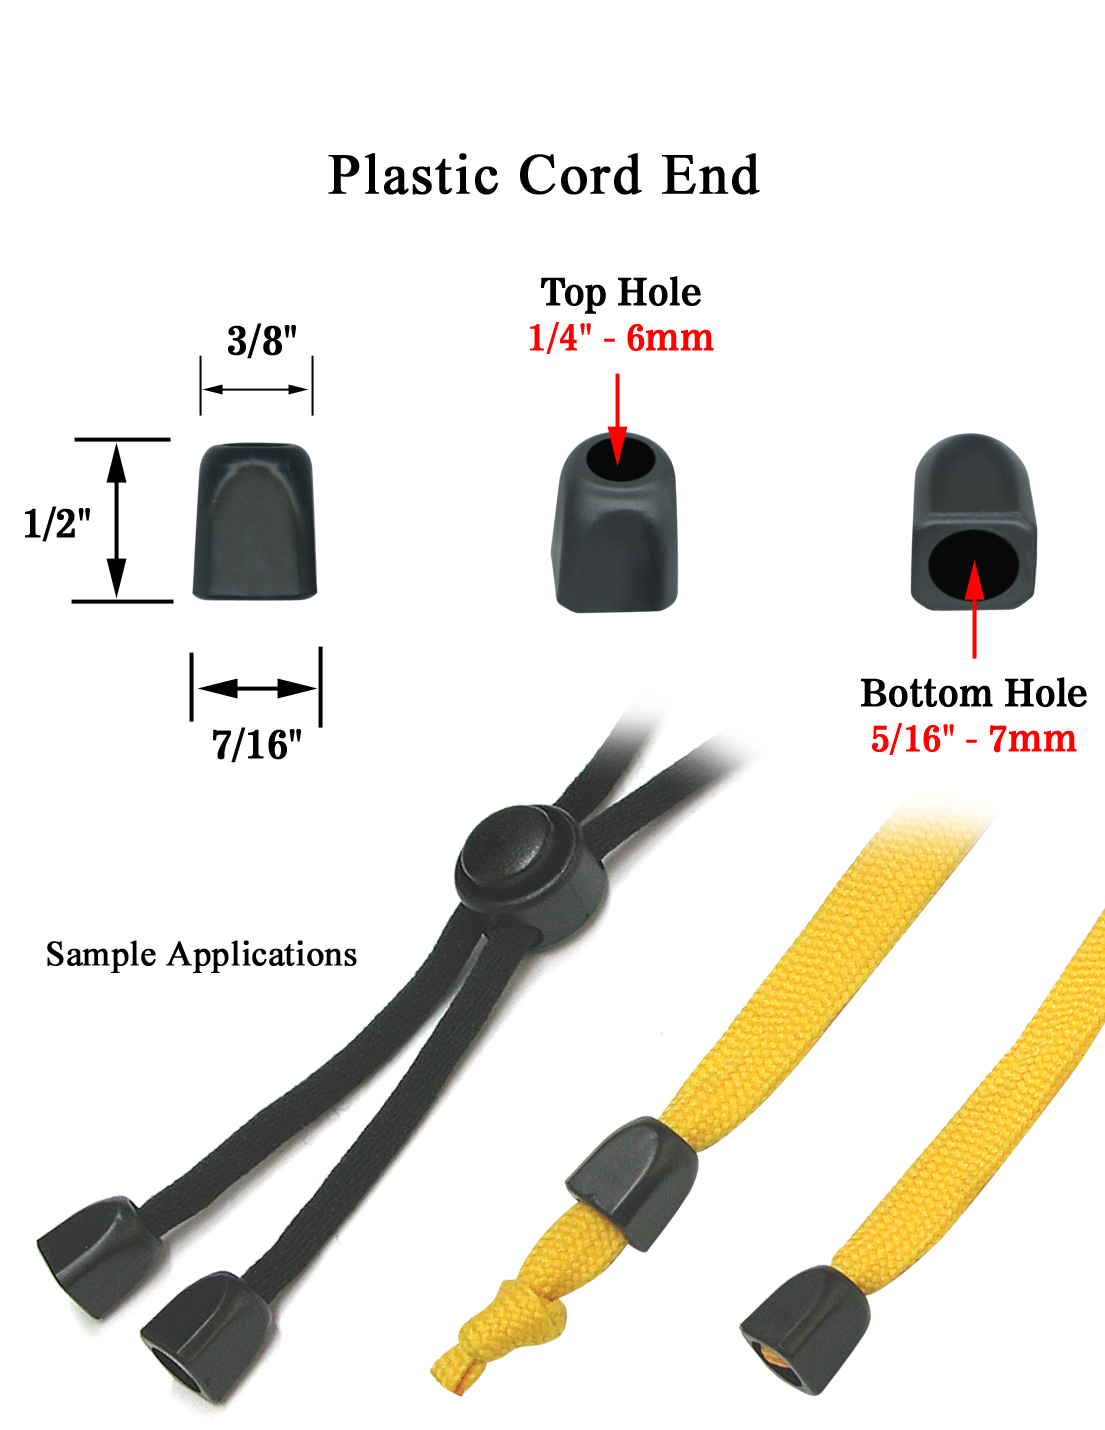 Sturdy Square Plastic Cord End - CaliforniaLanyards